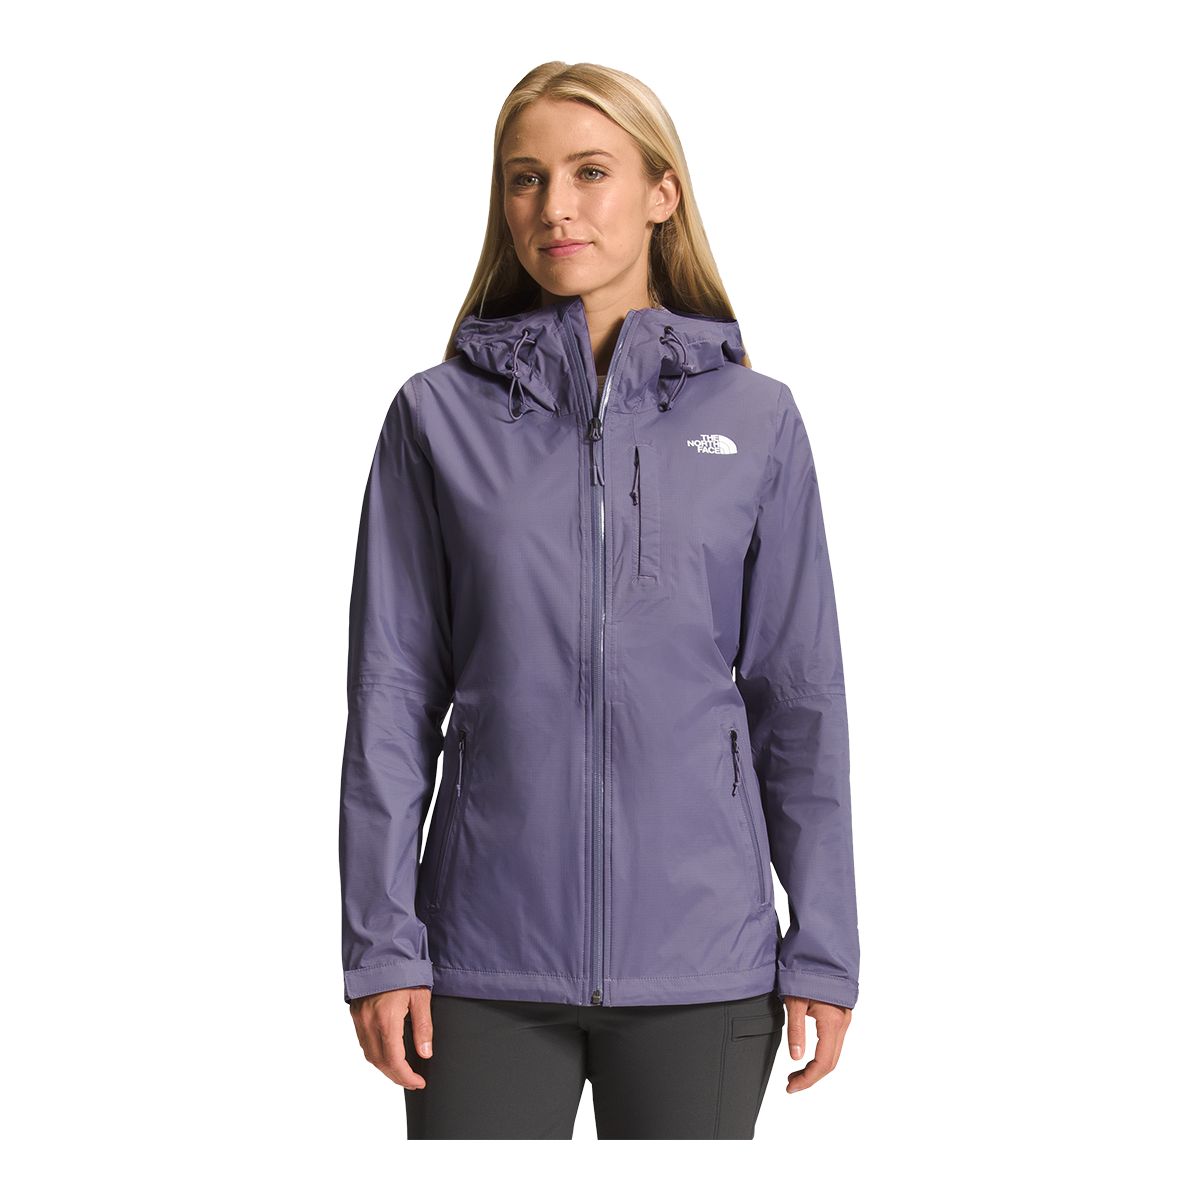 Image of The North Face Women's Antora Jacket